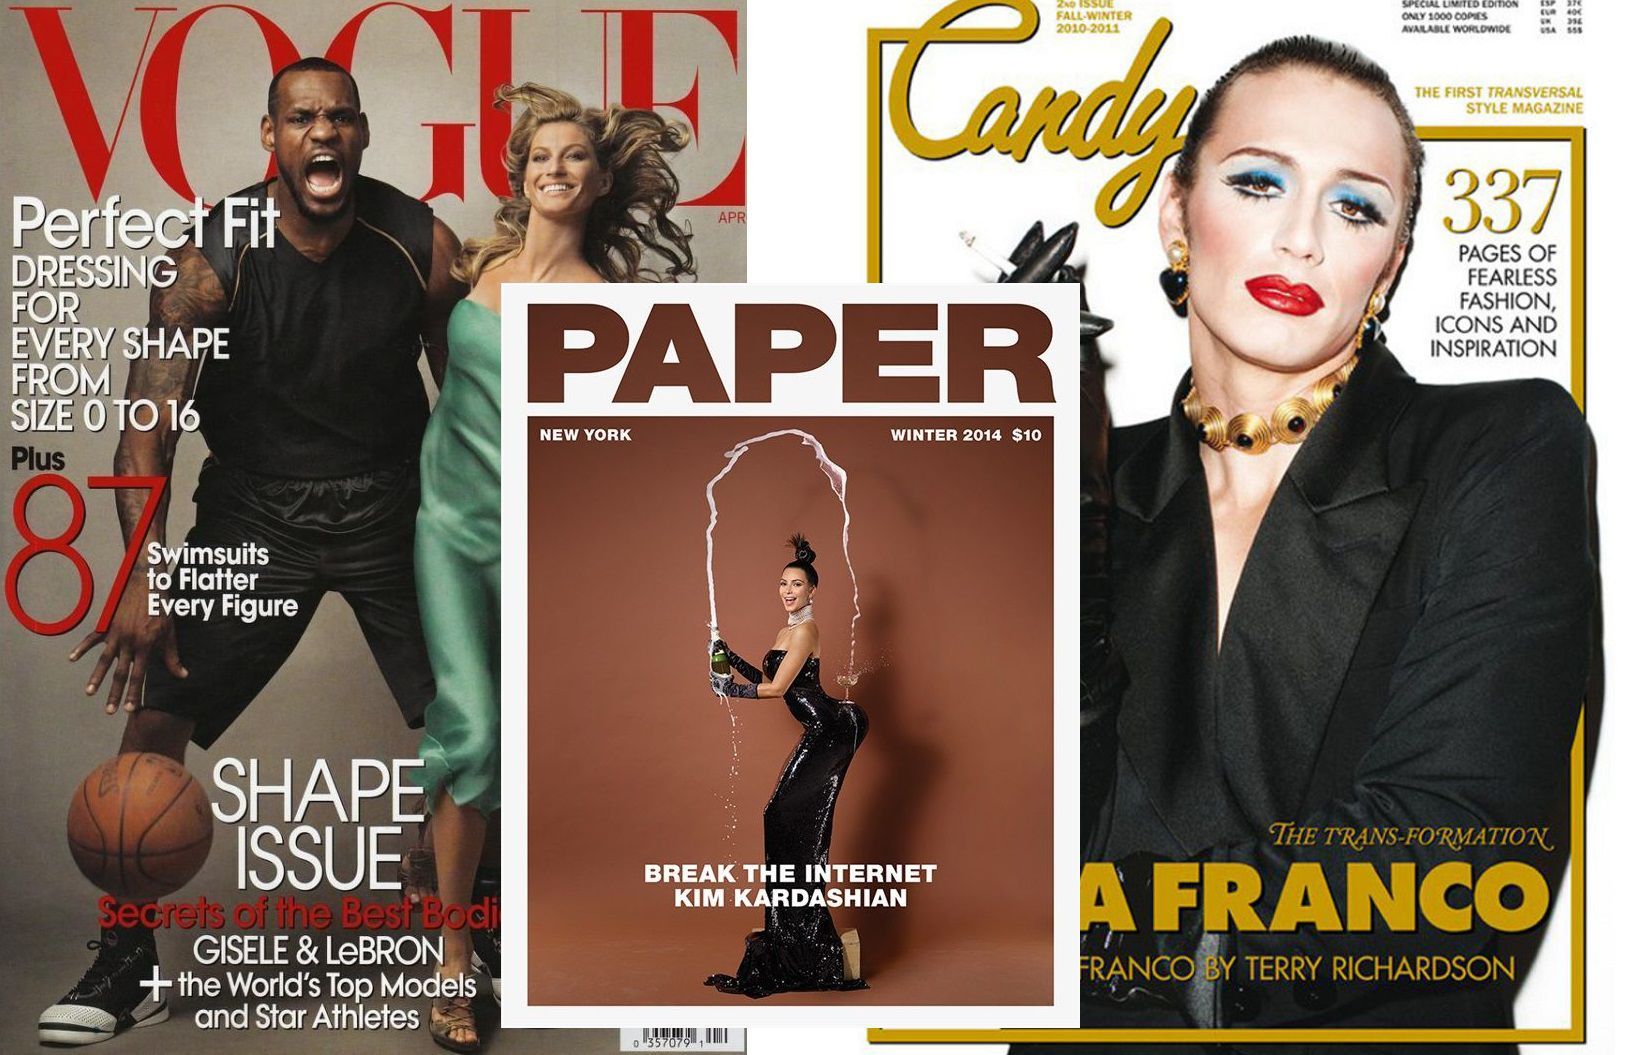 Vanity Fair's September Cover Sells Something. And Not Only What